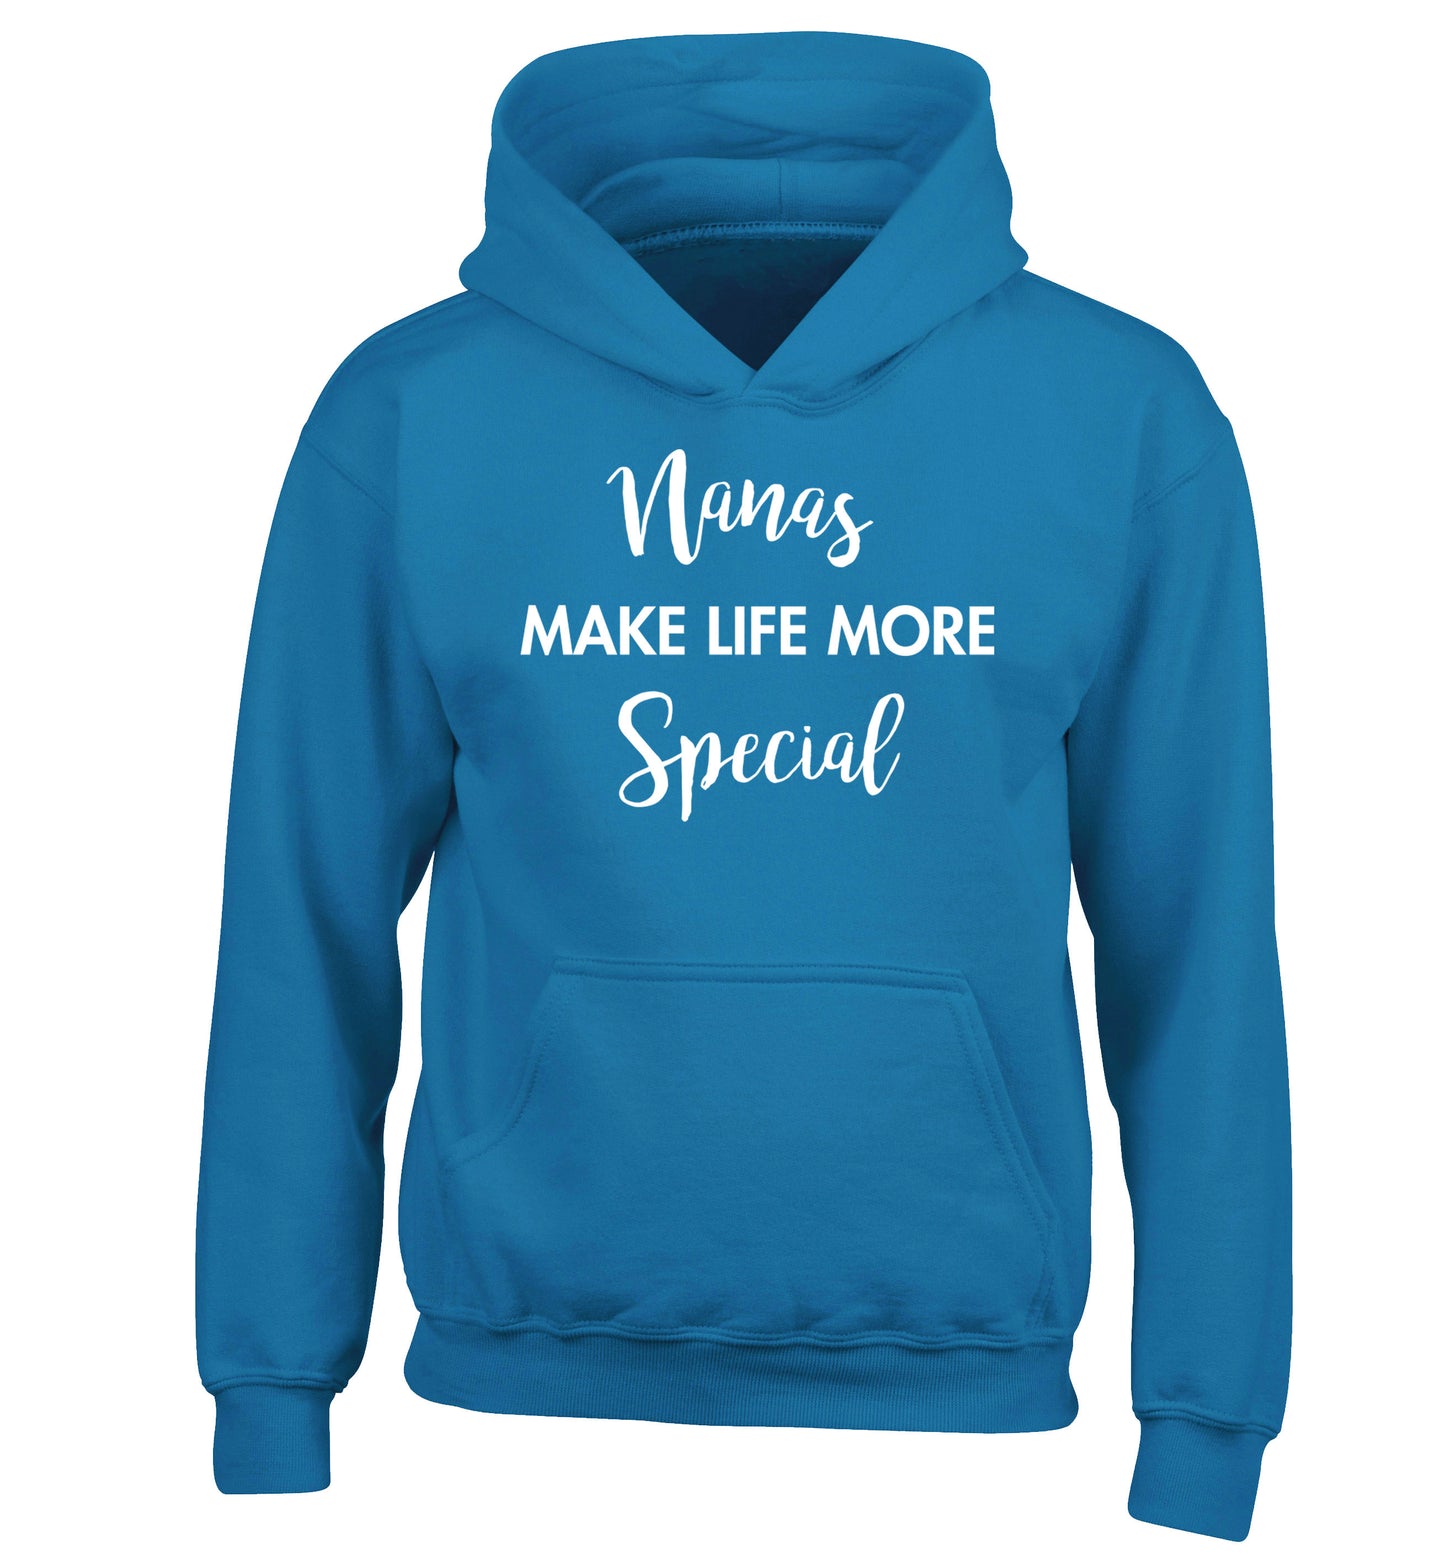 Nanas make life more special children's blue hoodie 12-14 Years